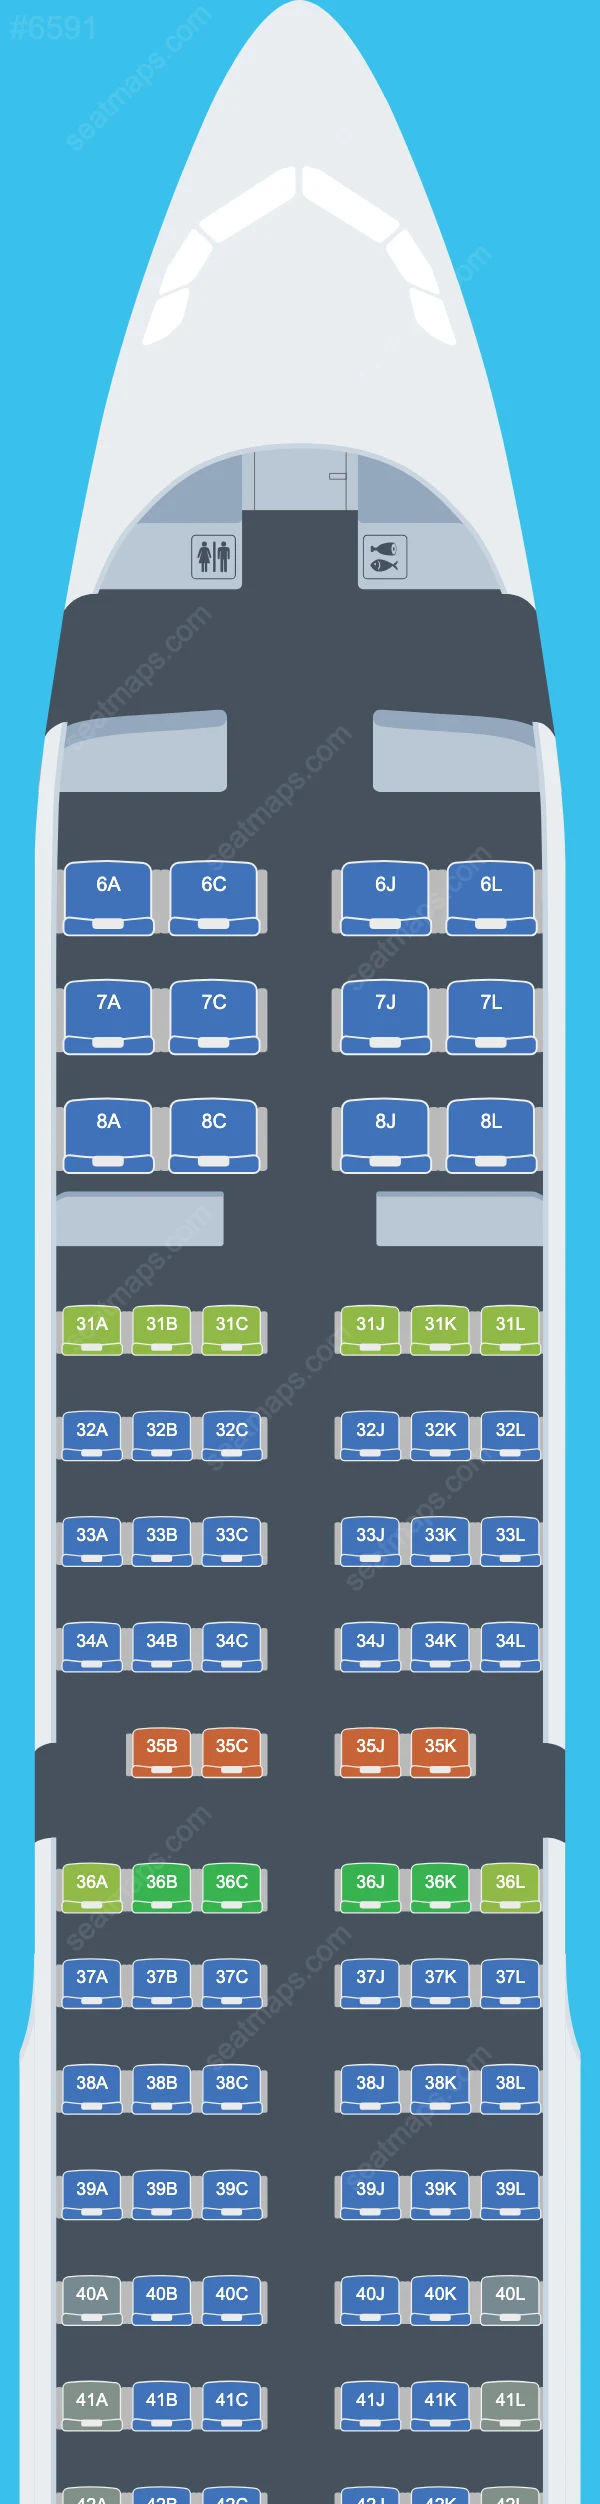 China Eastern Airbus A321 Seat Maps A321-200 V.1